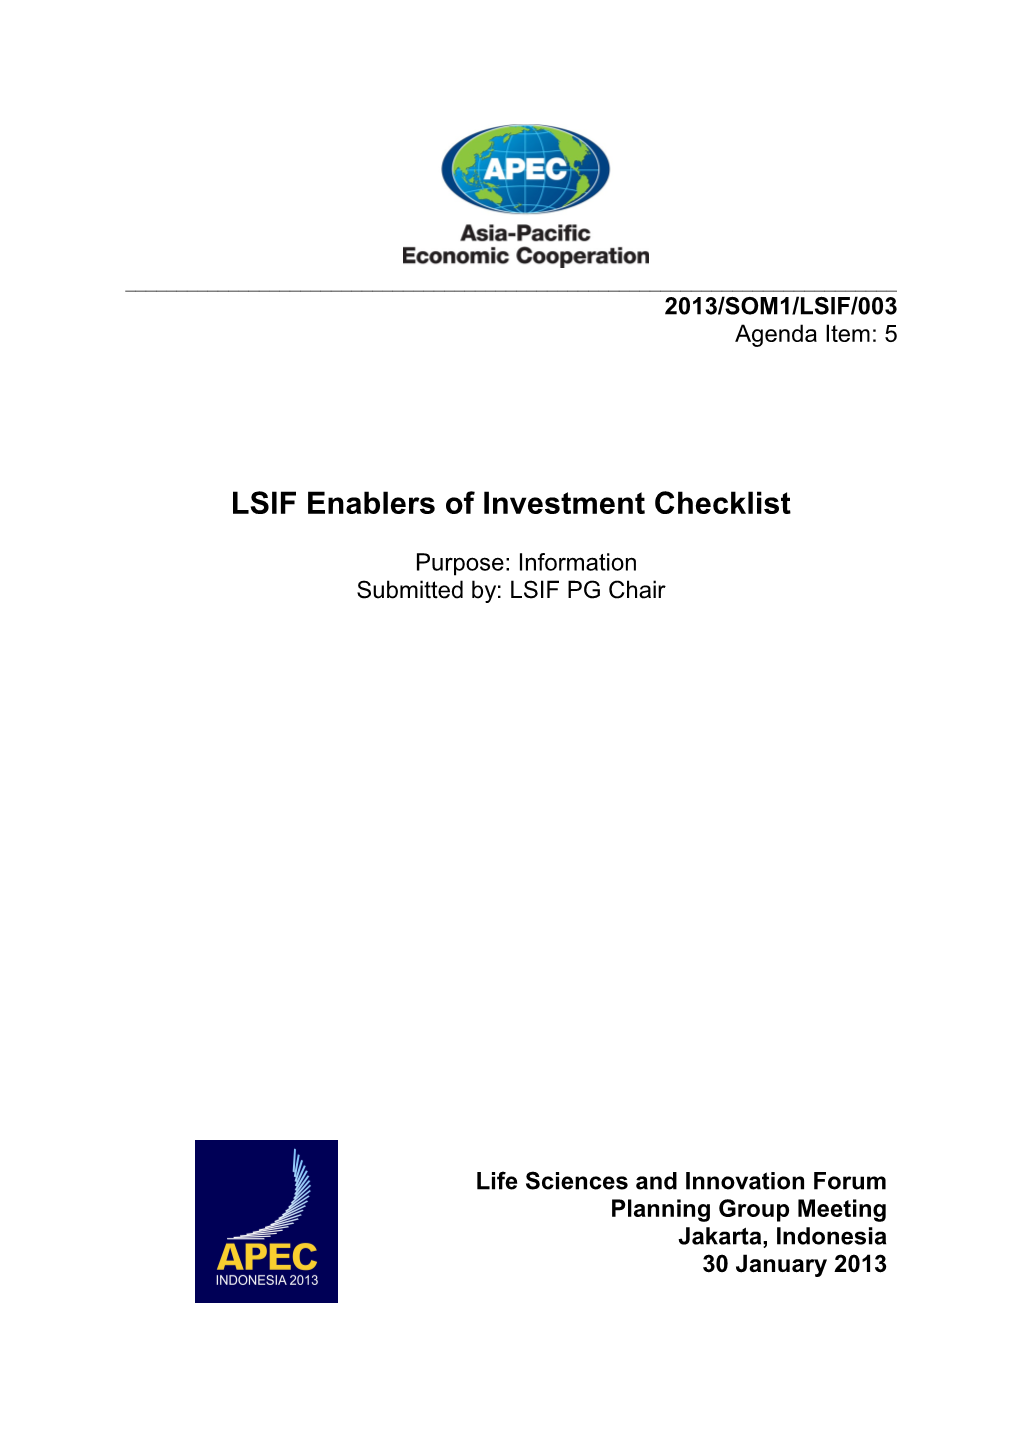 LSIF Enablers of Investment Checklist